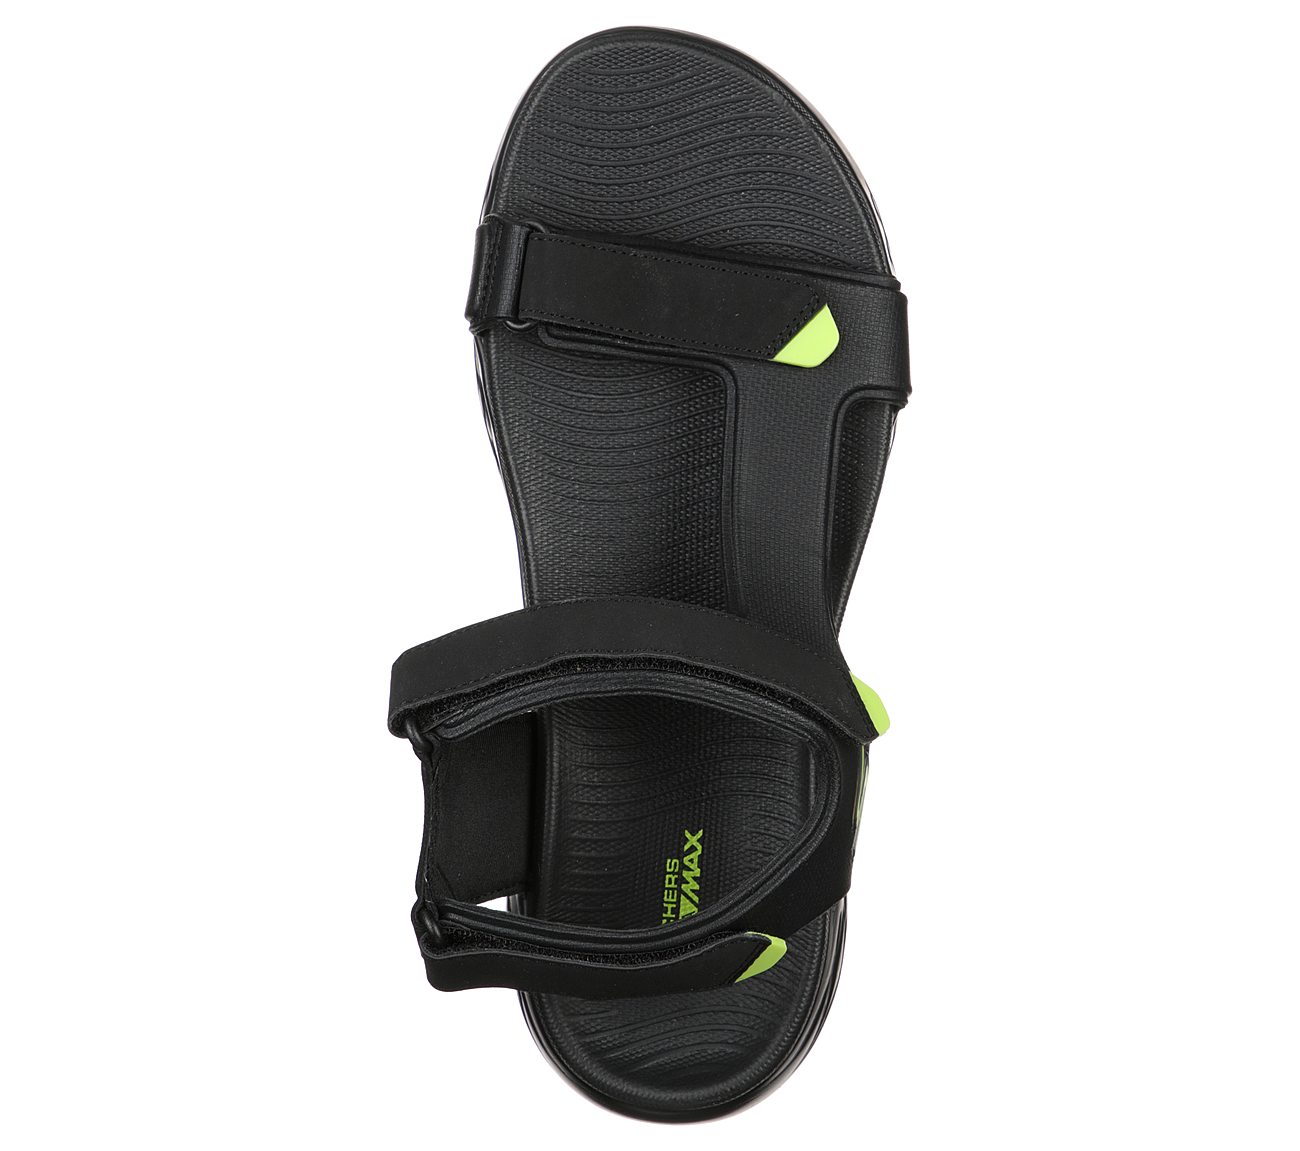 ON-THE-GO 600 - VENTURE, BLACK/LIME Footwear Top View